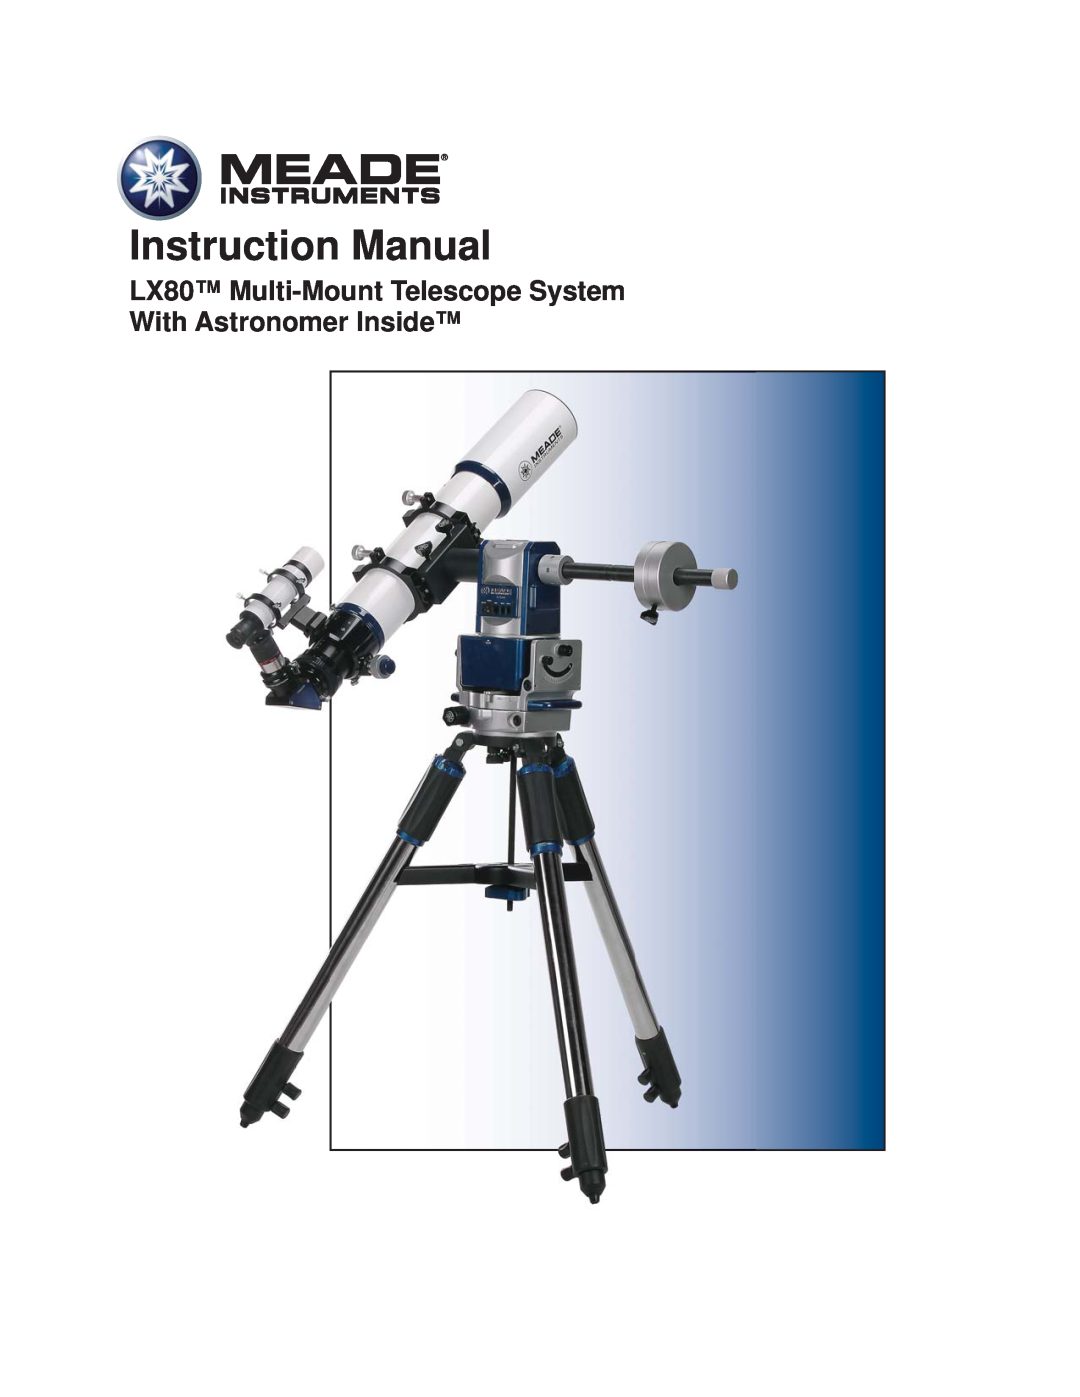 Meade instruction manual LX80 Multi-Mount Telescope System With Astronomer Inside, Instruction Manual 